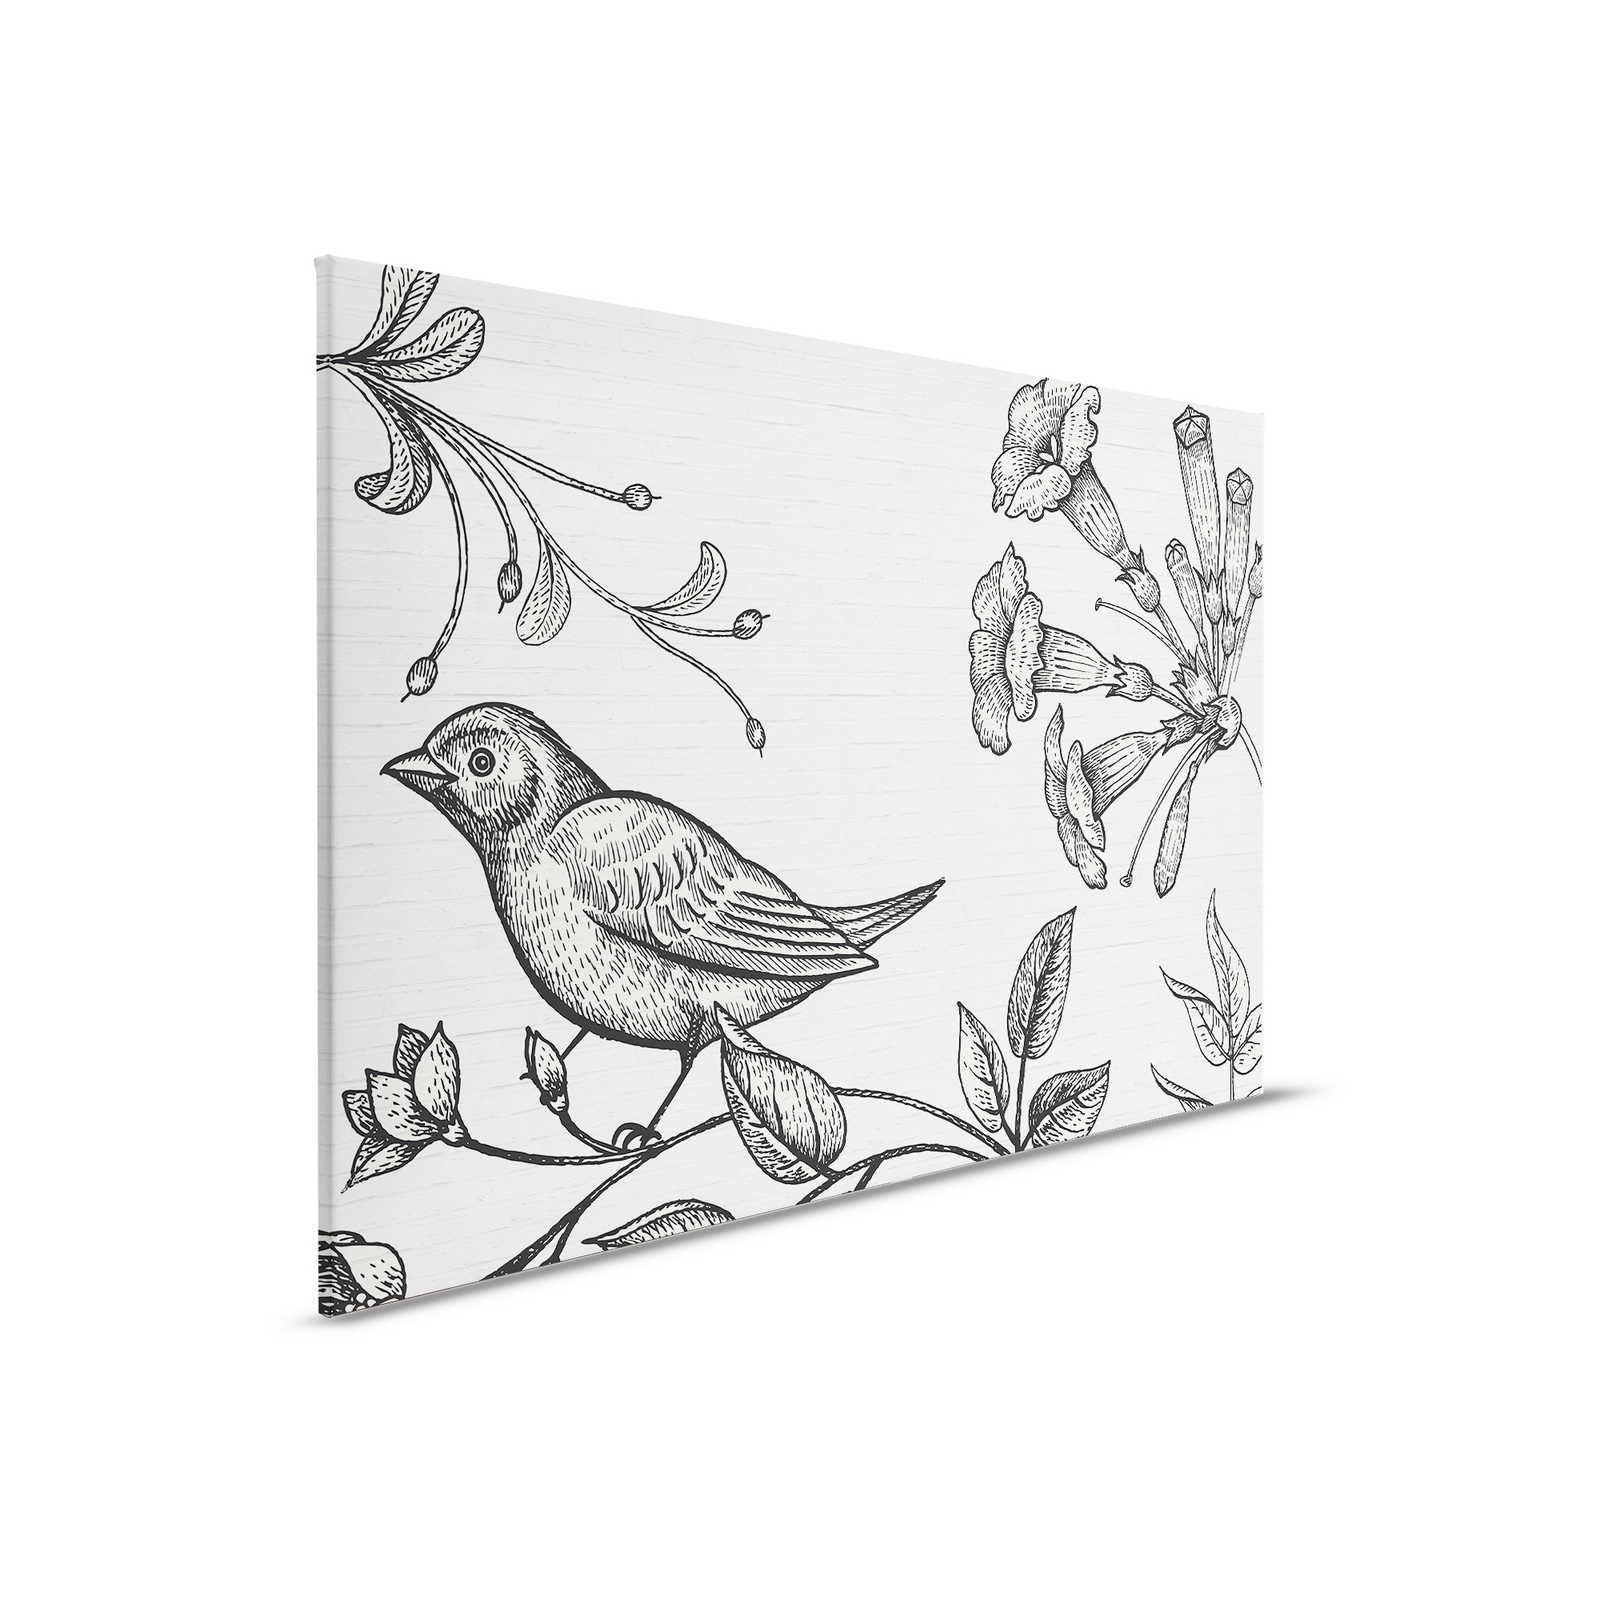 Stone Wall Canvas Painting with Bird & Flowers Graphic - 0.90 m x 0.60 m
